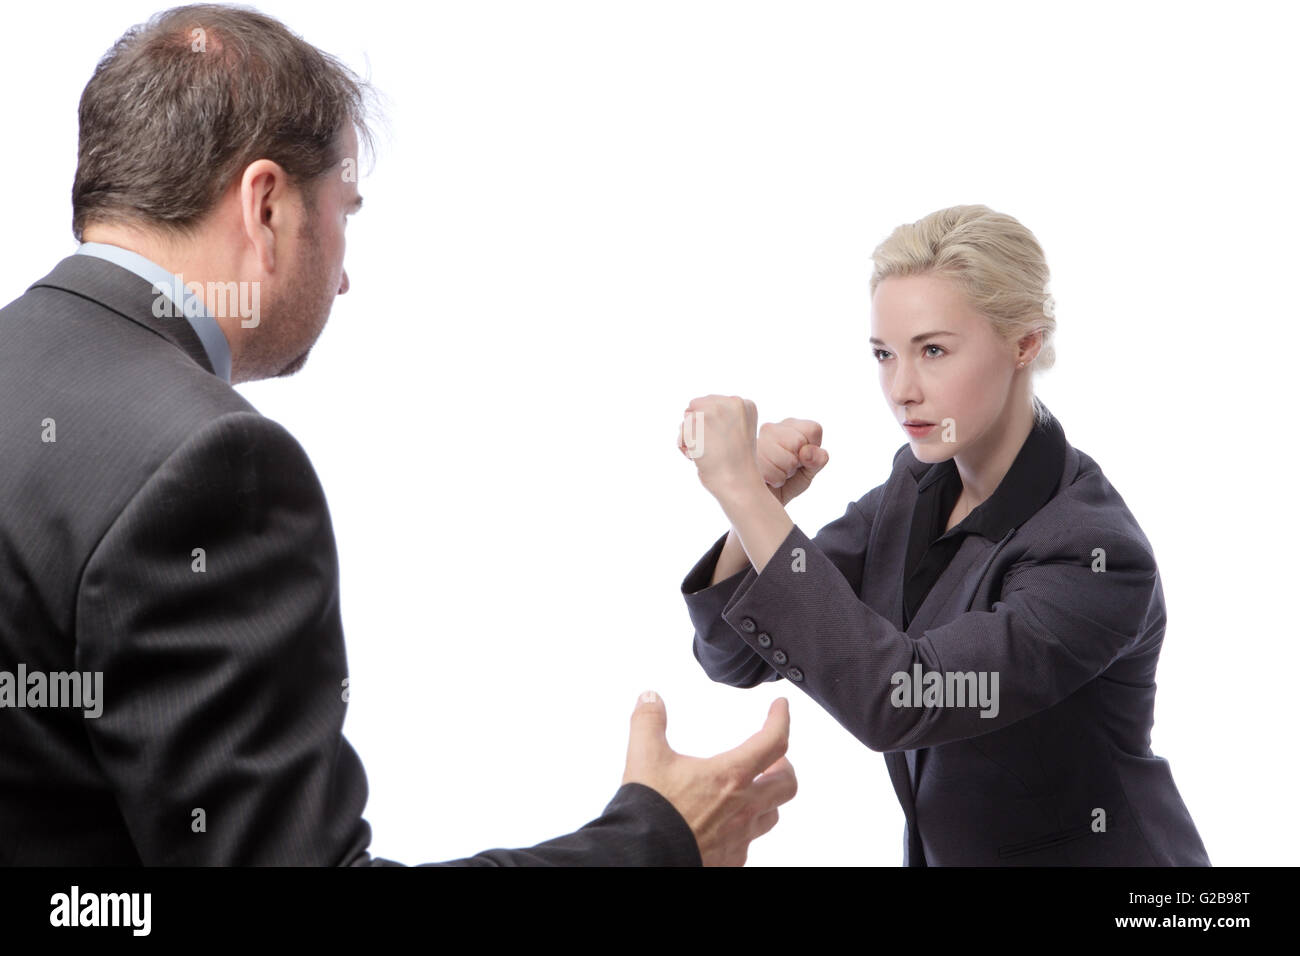 Studio shot of two co-workers wearing suits, fighting in the office, isolated on a white background. Stock Photo